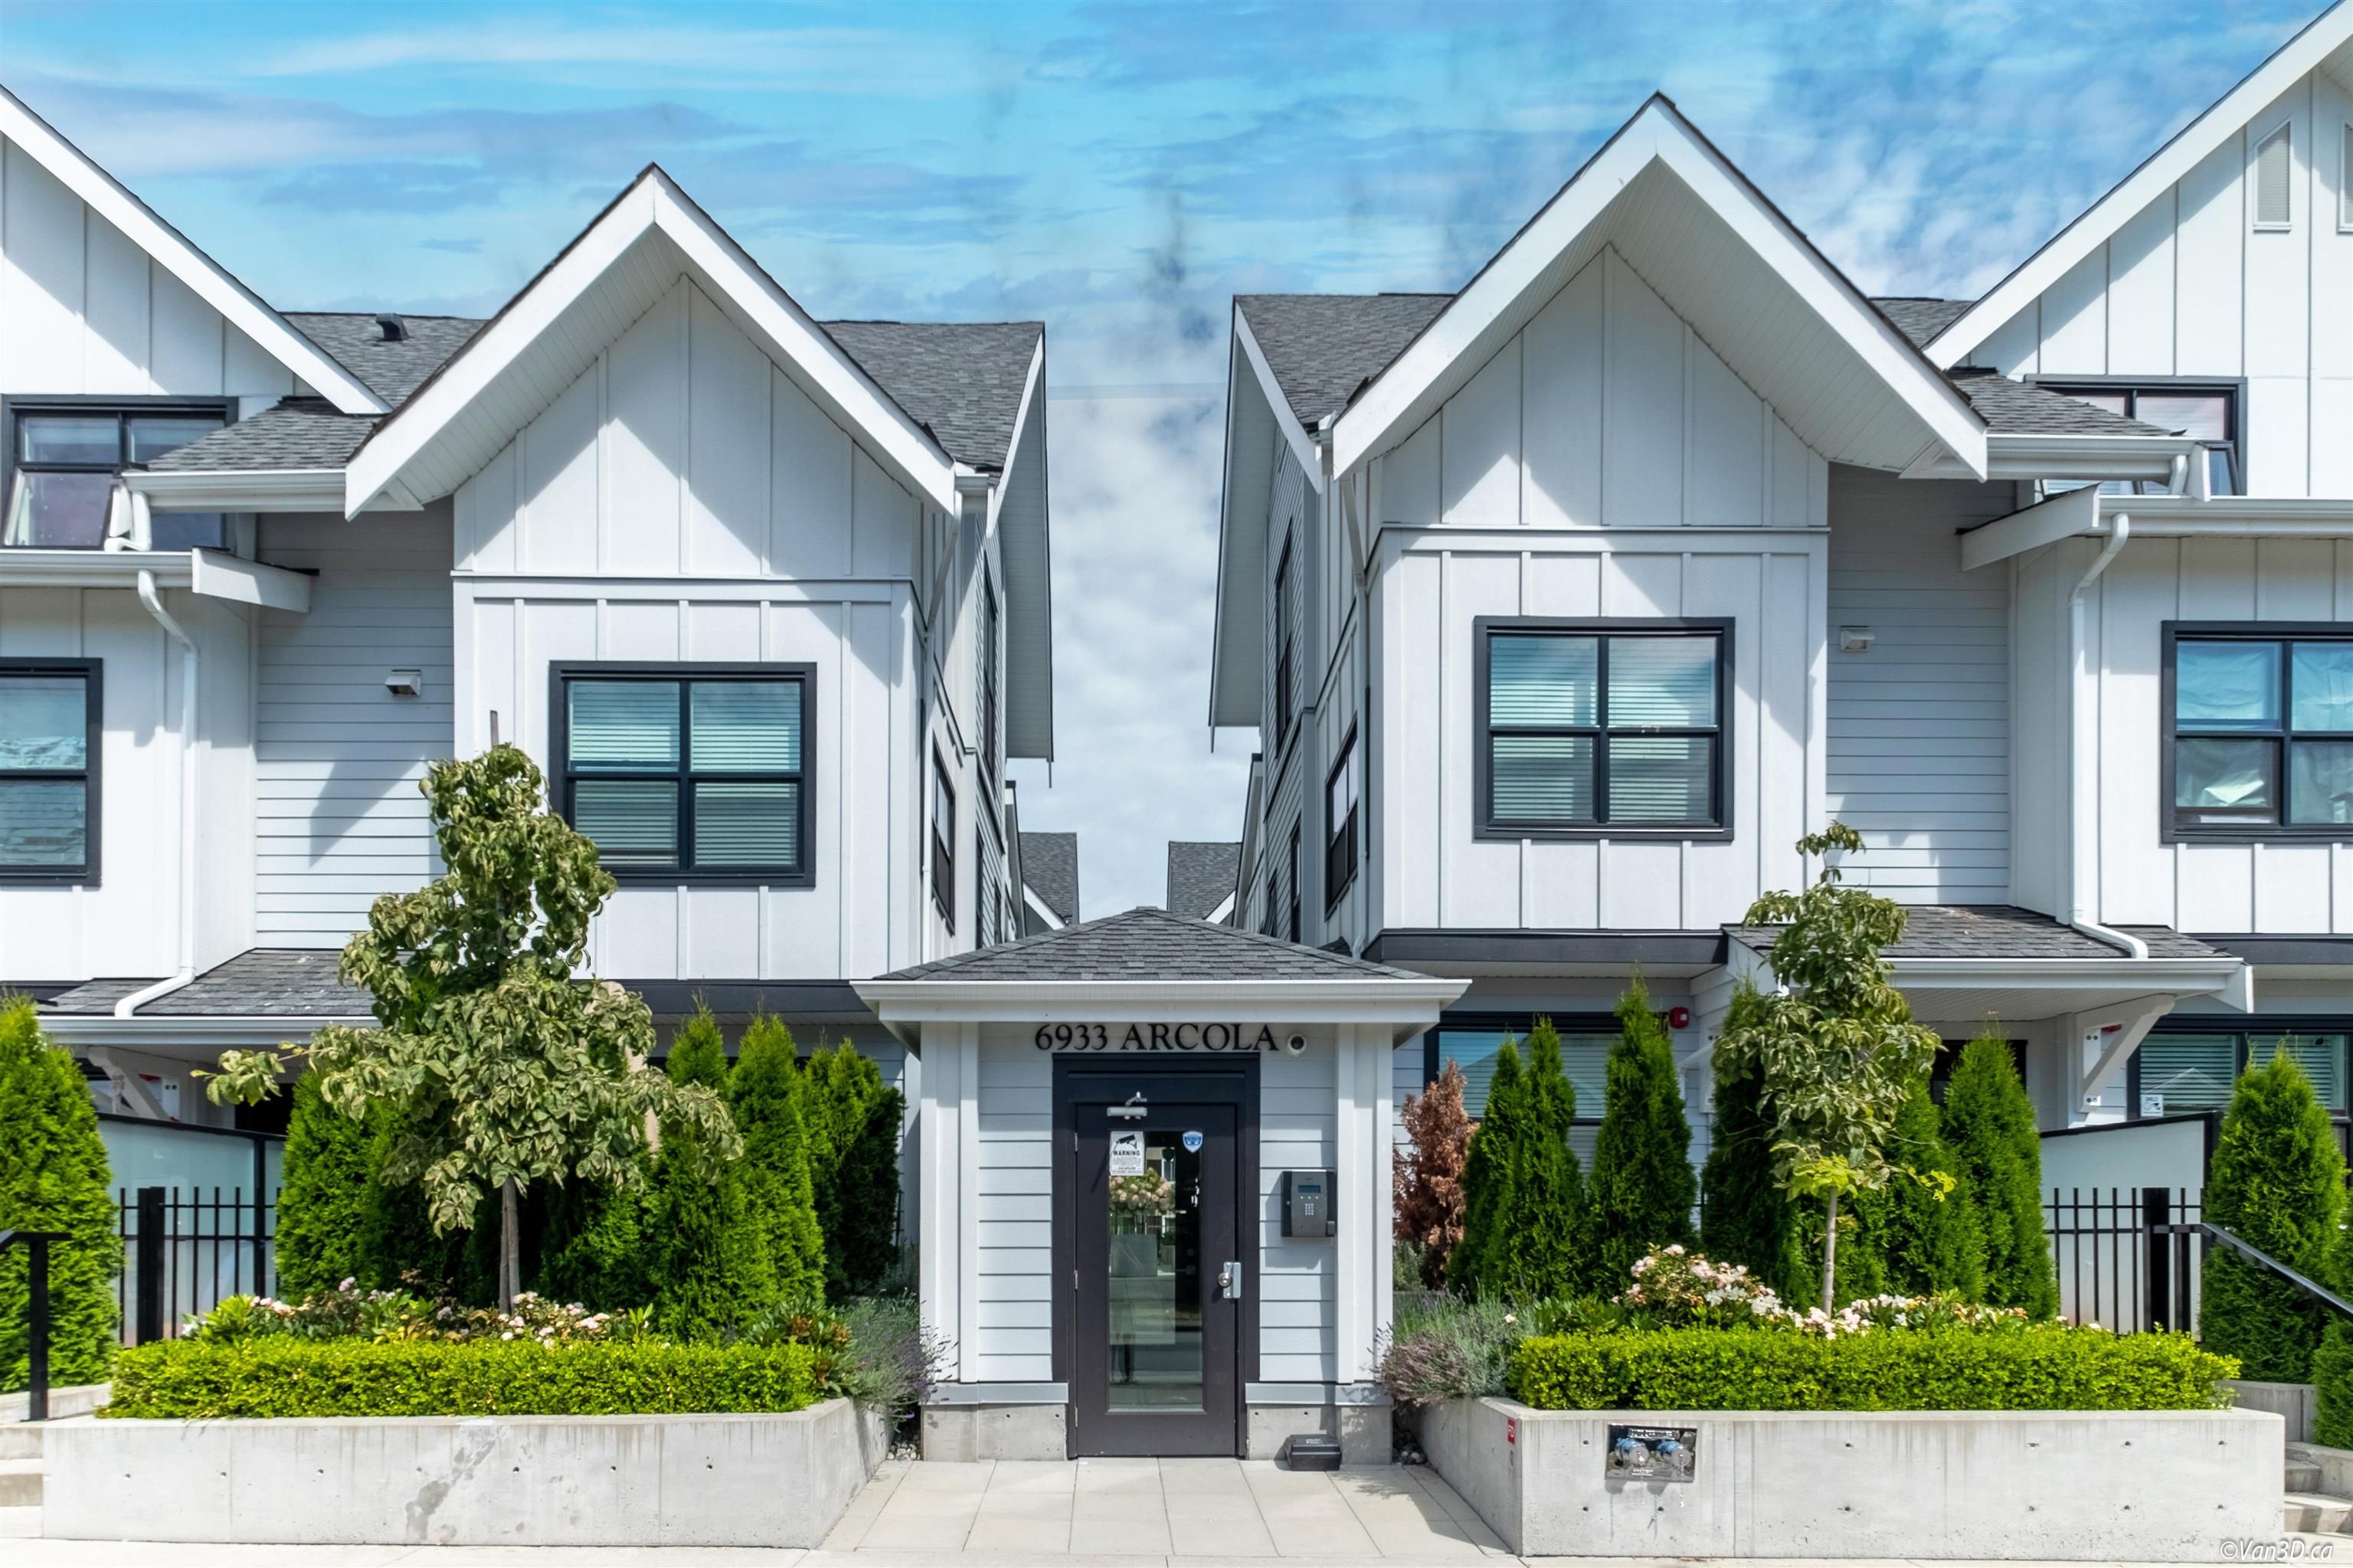 Open House. Open House on Sunday, September 10, 2023 2:00PM - 4:00PM
Beautiful 2yr old spacious 1500 sqft Townhouse with 3 bedrooms, 2 1/2baths plus basement office use or ? This will not last ! Popular Highgate Burnaby location close to everything. This 